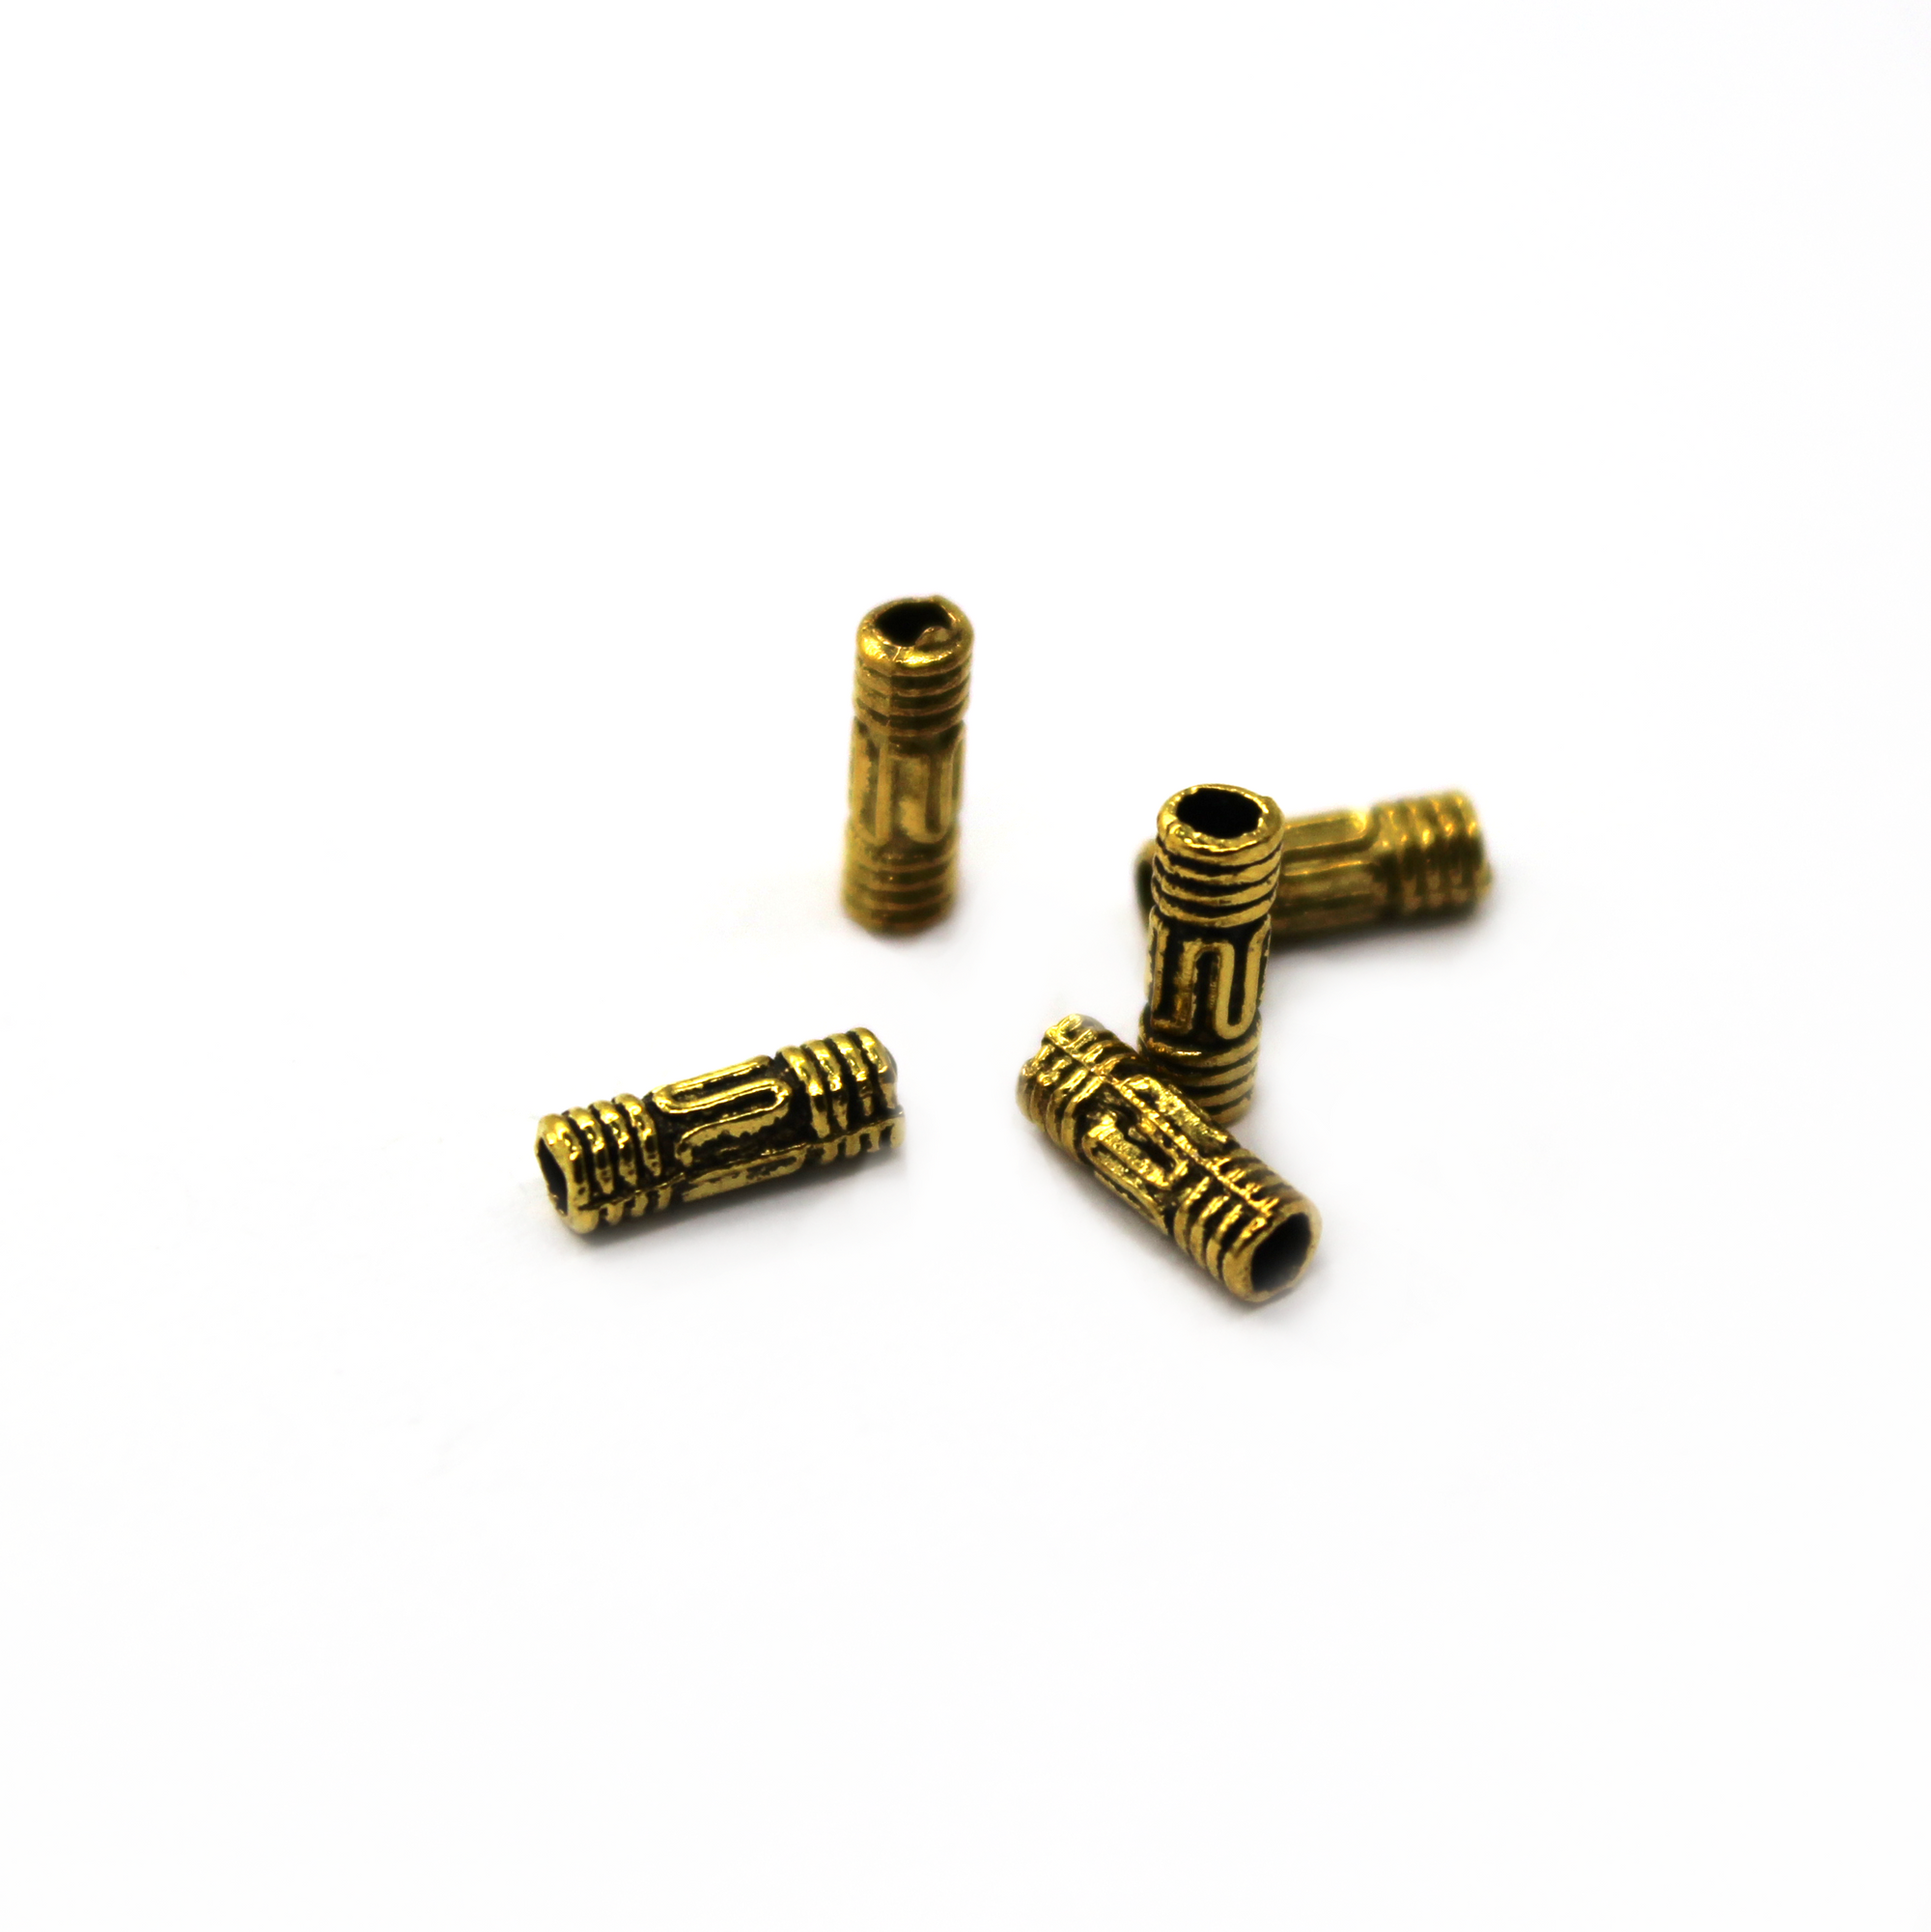 Spacers, Small Detailed Tube, Alloy, Antique Gold, 8.5mm X 2.5mm x 2mm(hole), Sold Per pkg of 20